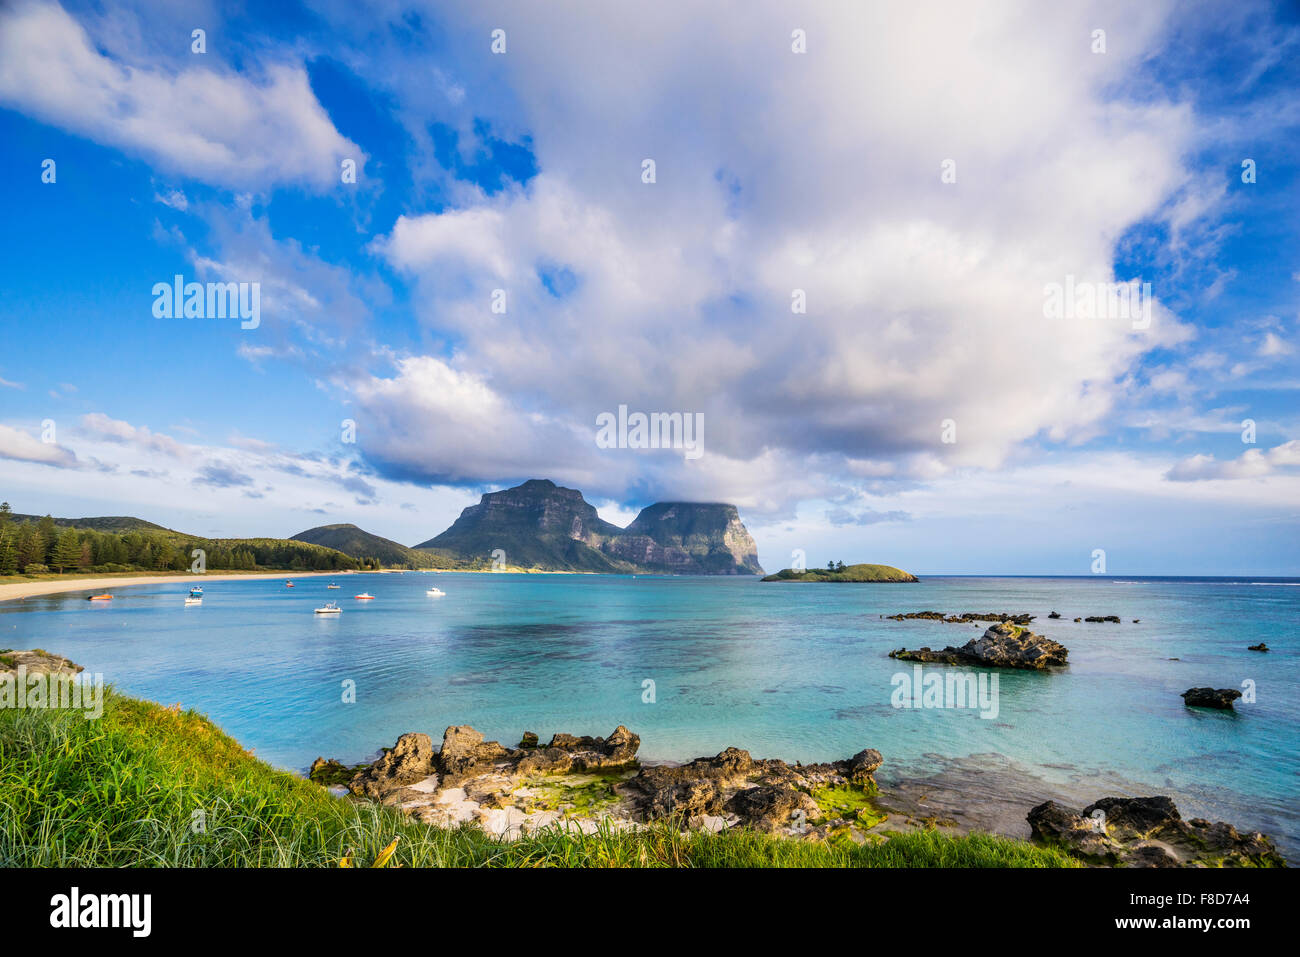 Lord Howe Island, view of Lord Howe Island Lagoon with Mount Lidgbird and the summit of 875 metre Mount Bower veiled in clouds Stock Photo